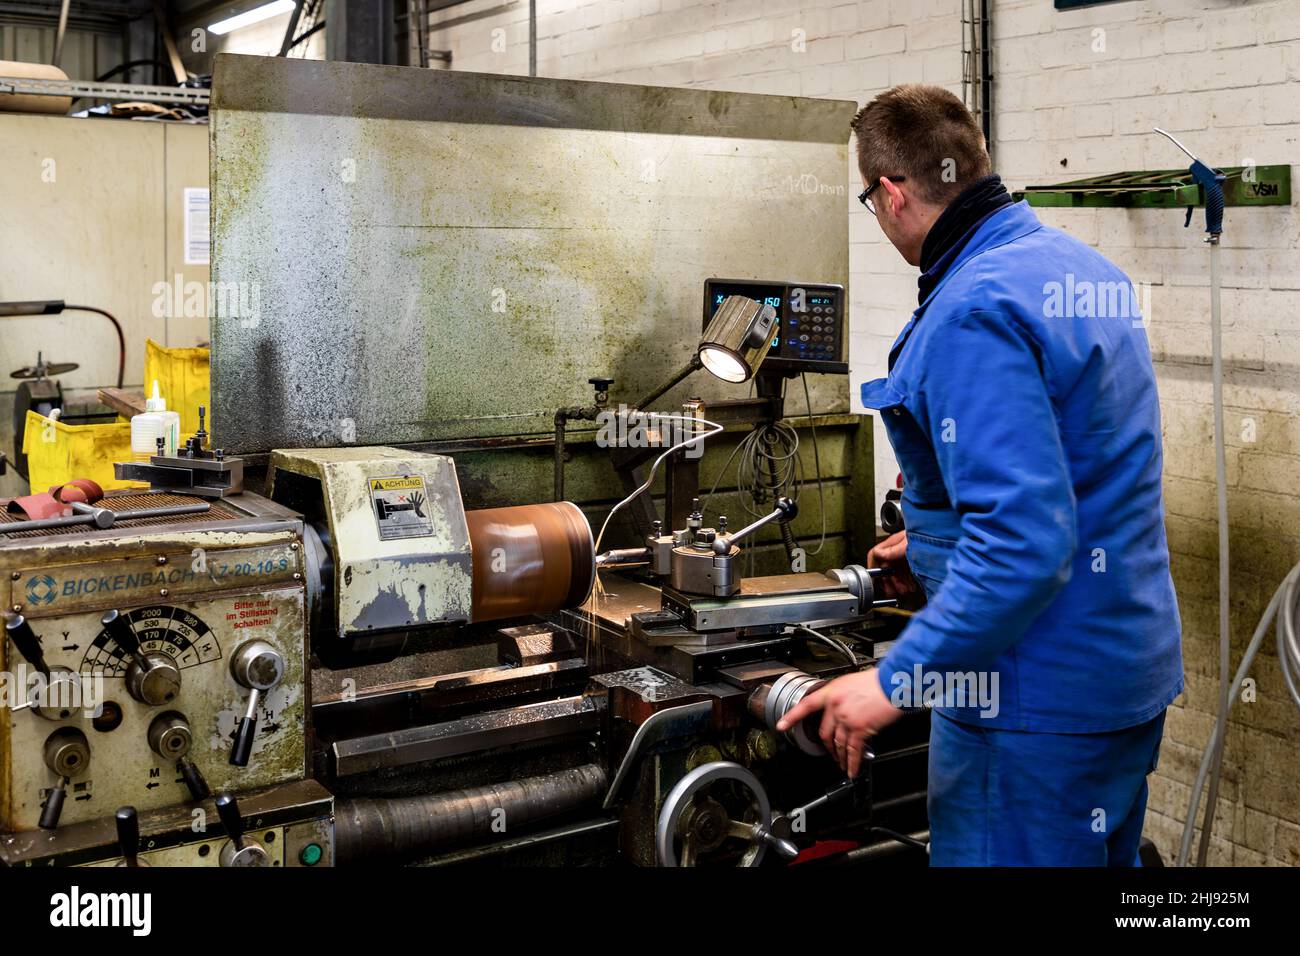 A worker at a lathe machine Stock Photo